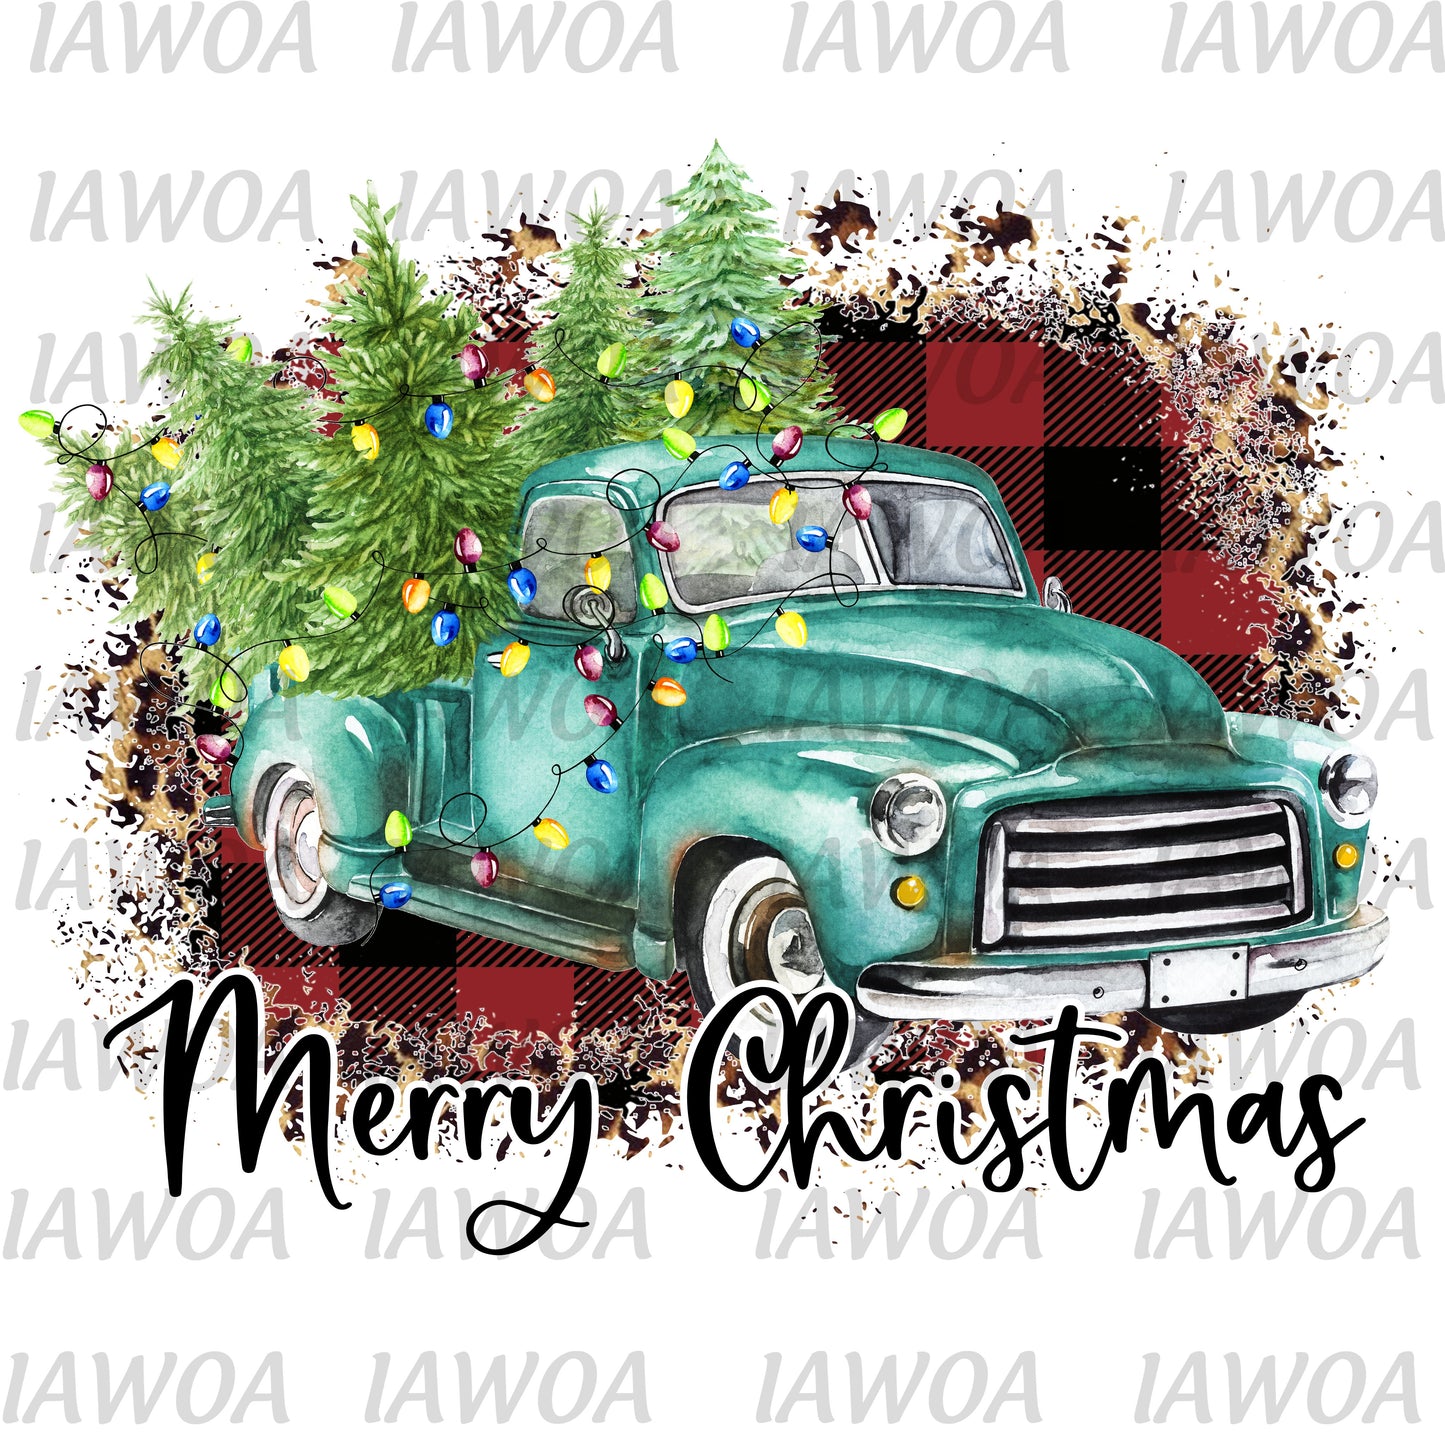 Christmas 419 - Merry Christmas Big Blue Truck Christmas Tree Truck - Sublimation Transfer Set/Ready To Press Sublimation Transfer